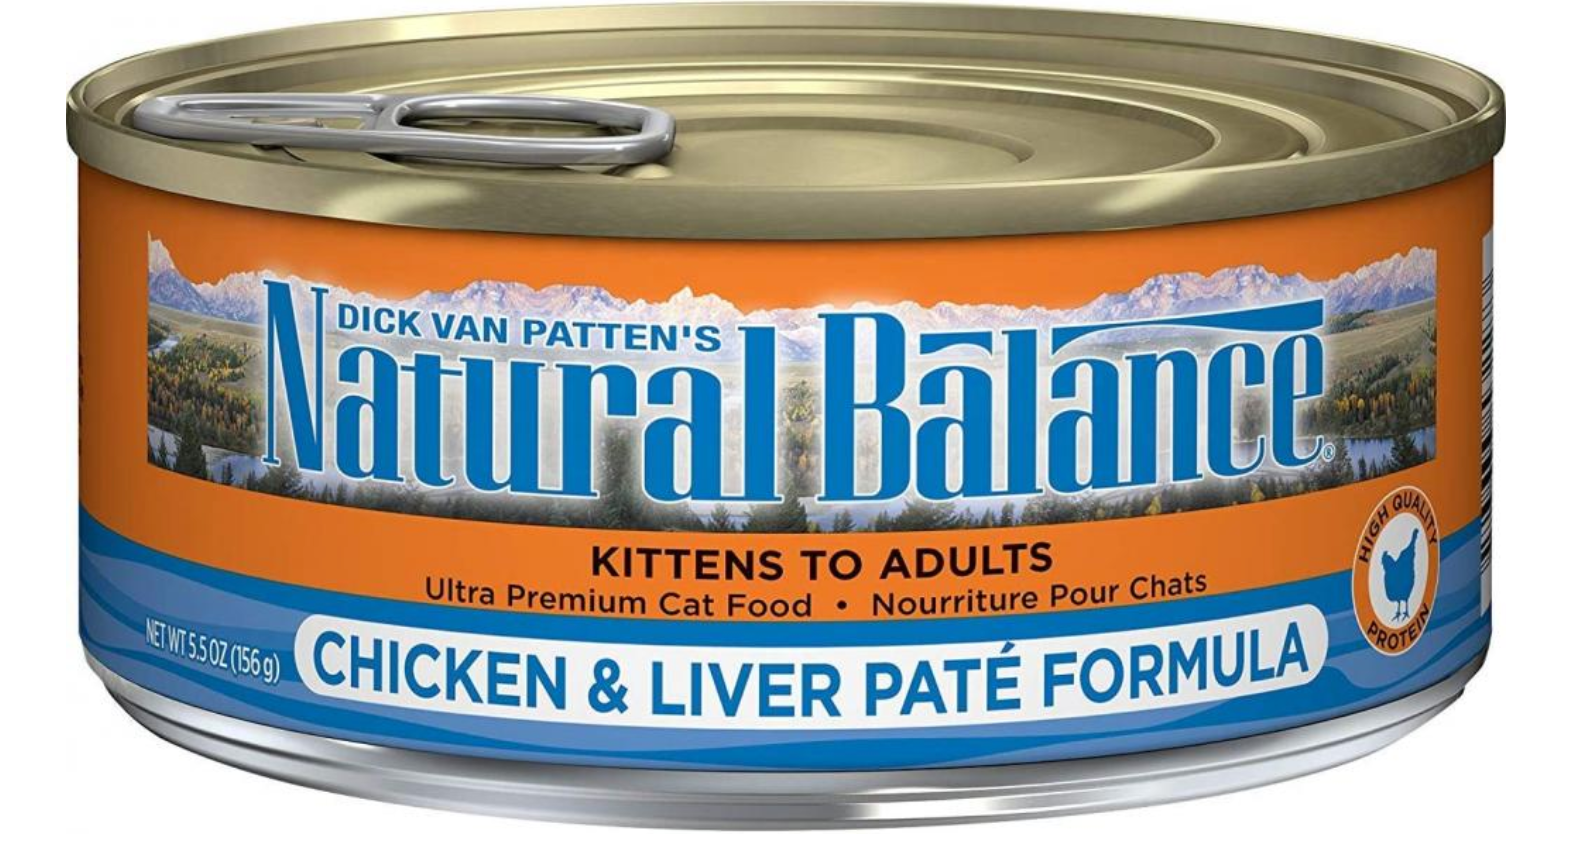 Cat Food Recalled Due To Elevated Levels Of Choline Chloride Dvm360